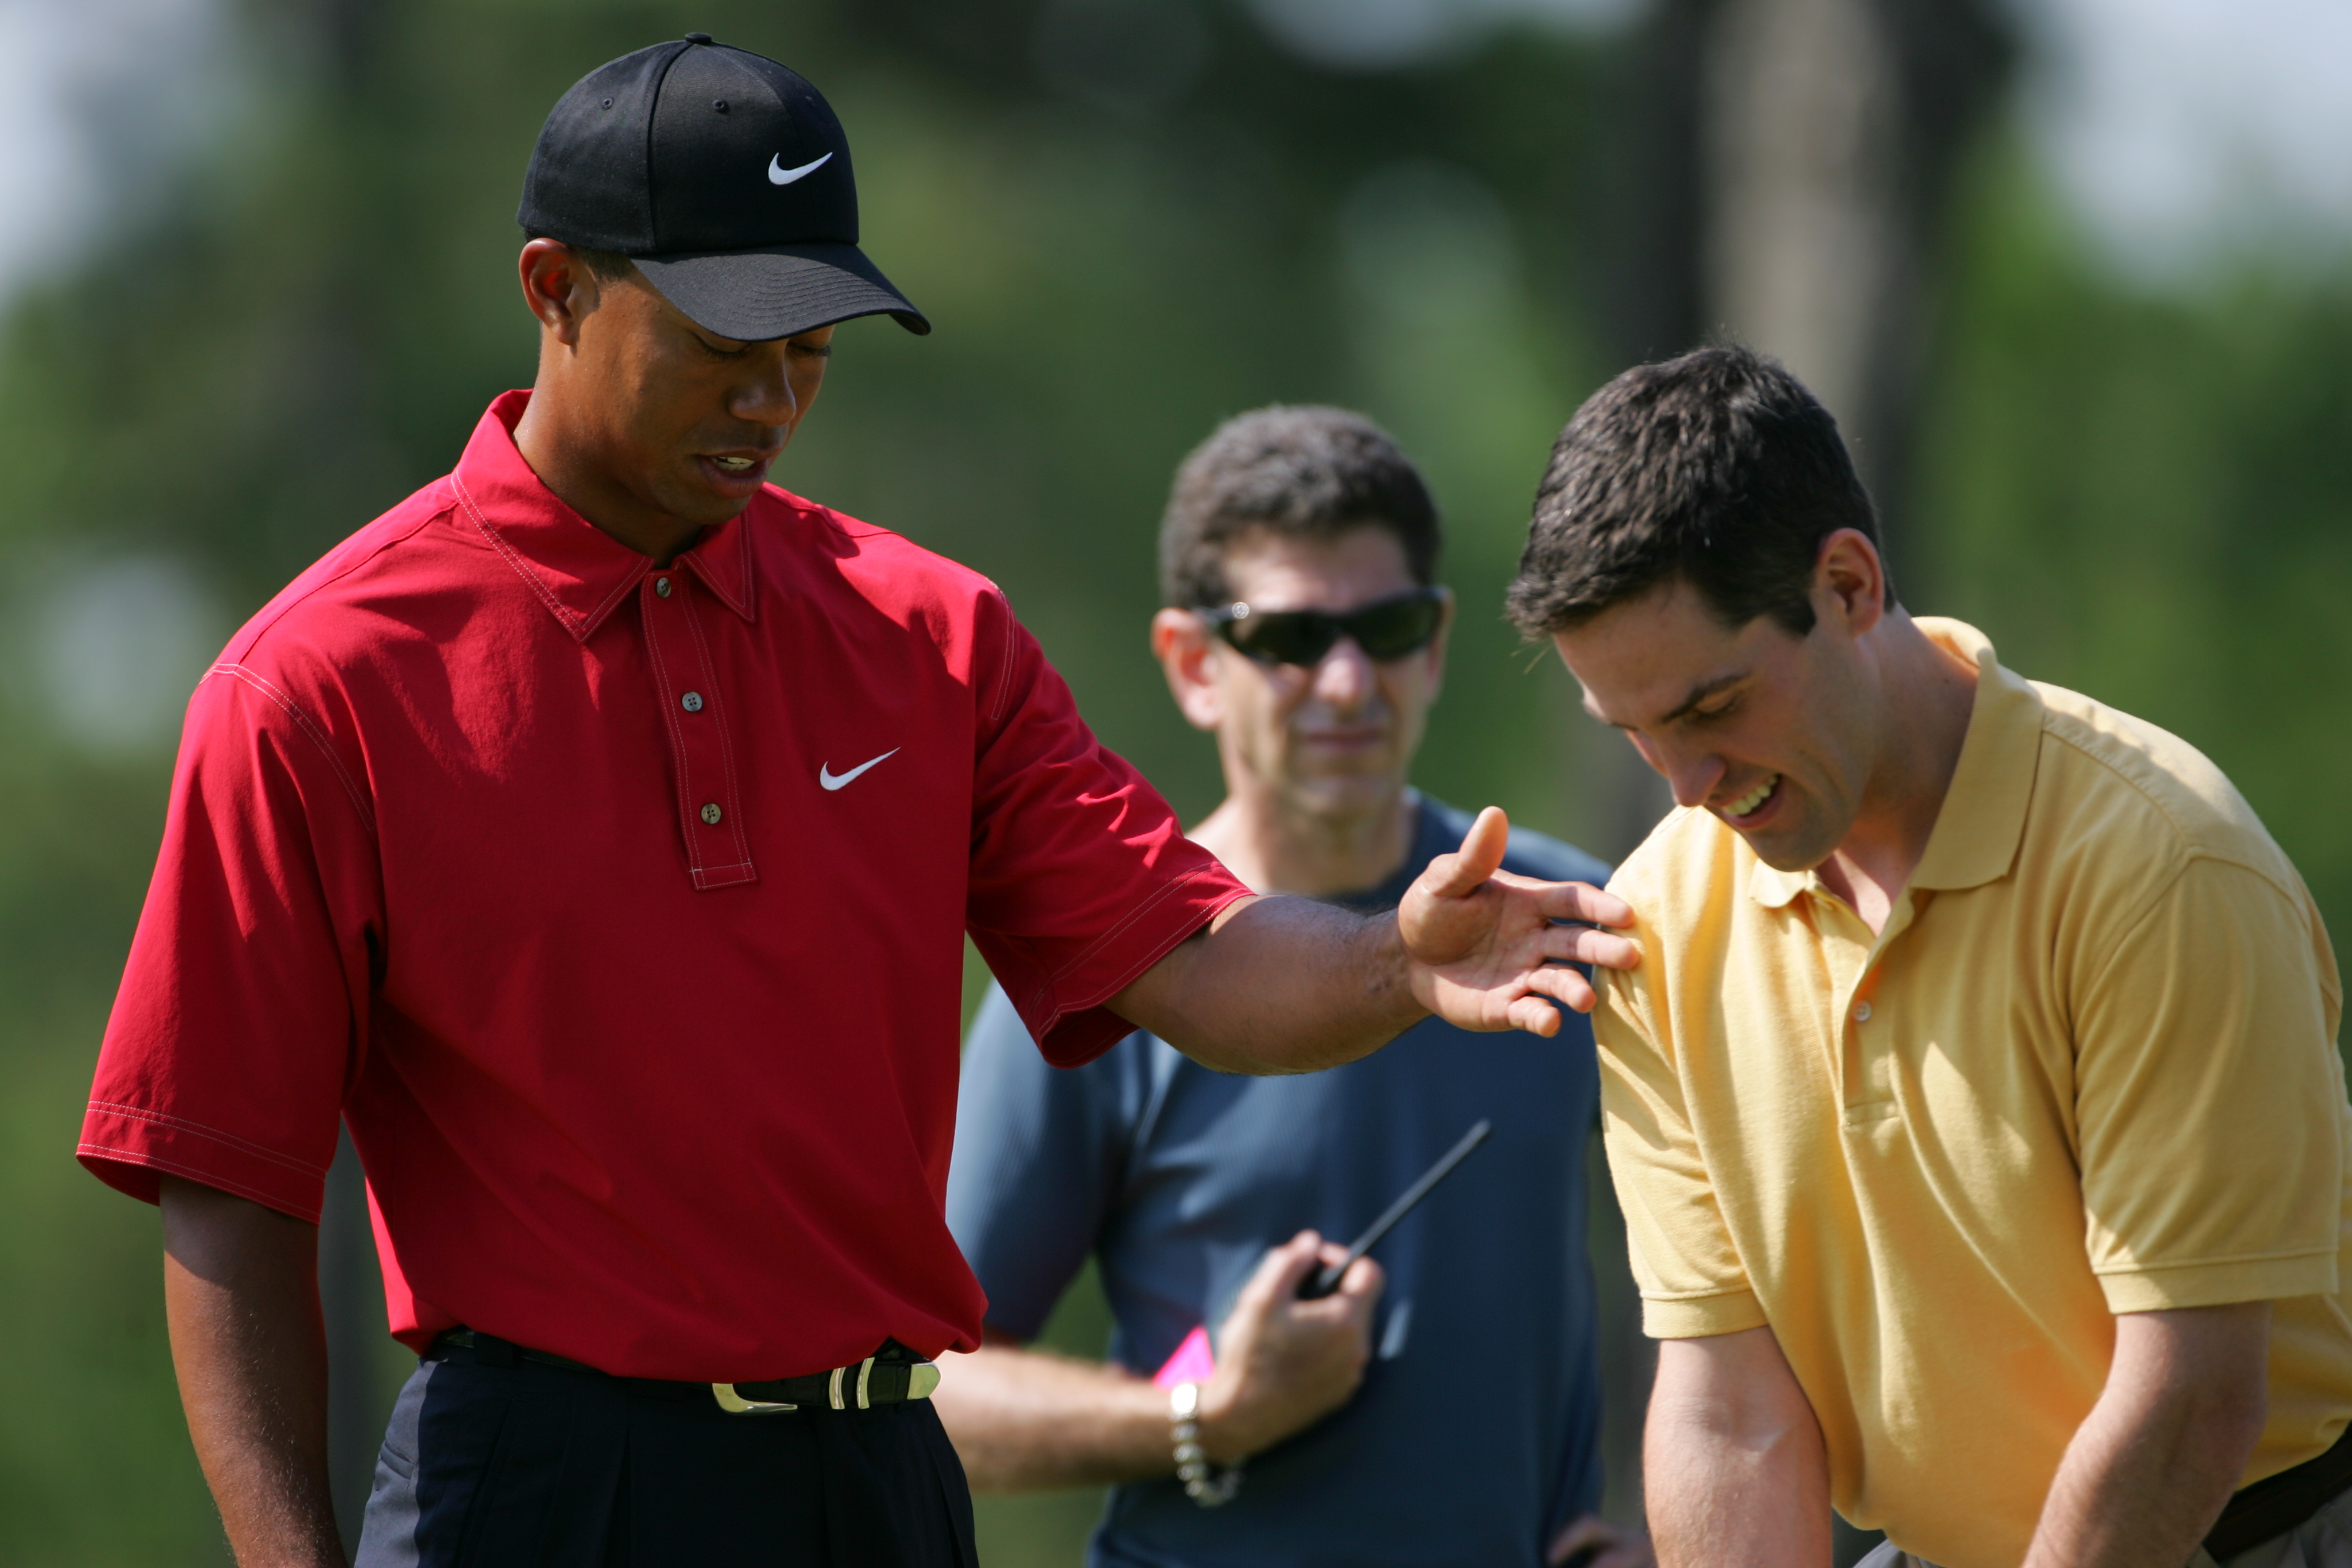 Dave gives Tiger Woods a golf lesson during the shoot for an EA Sports commercial.